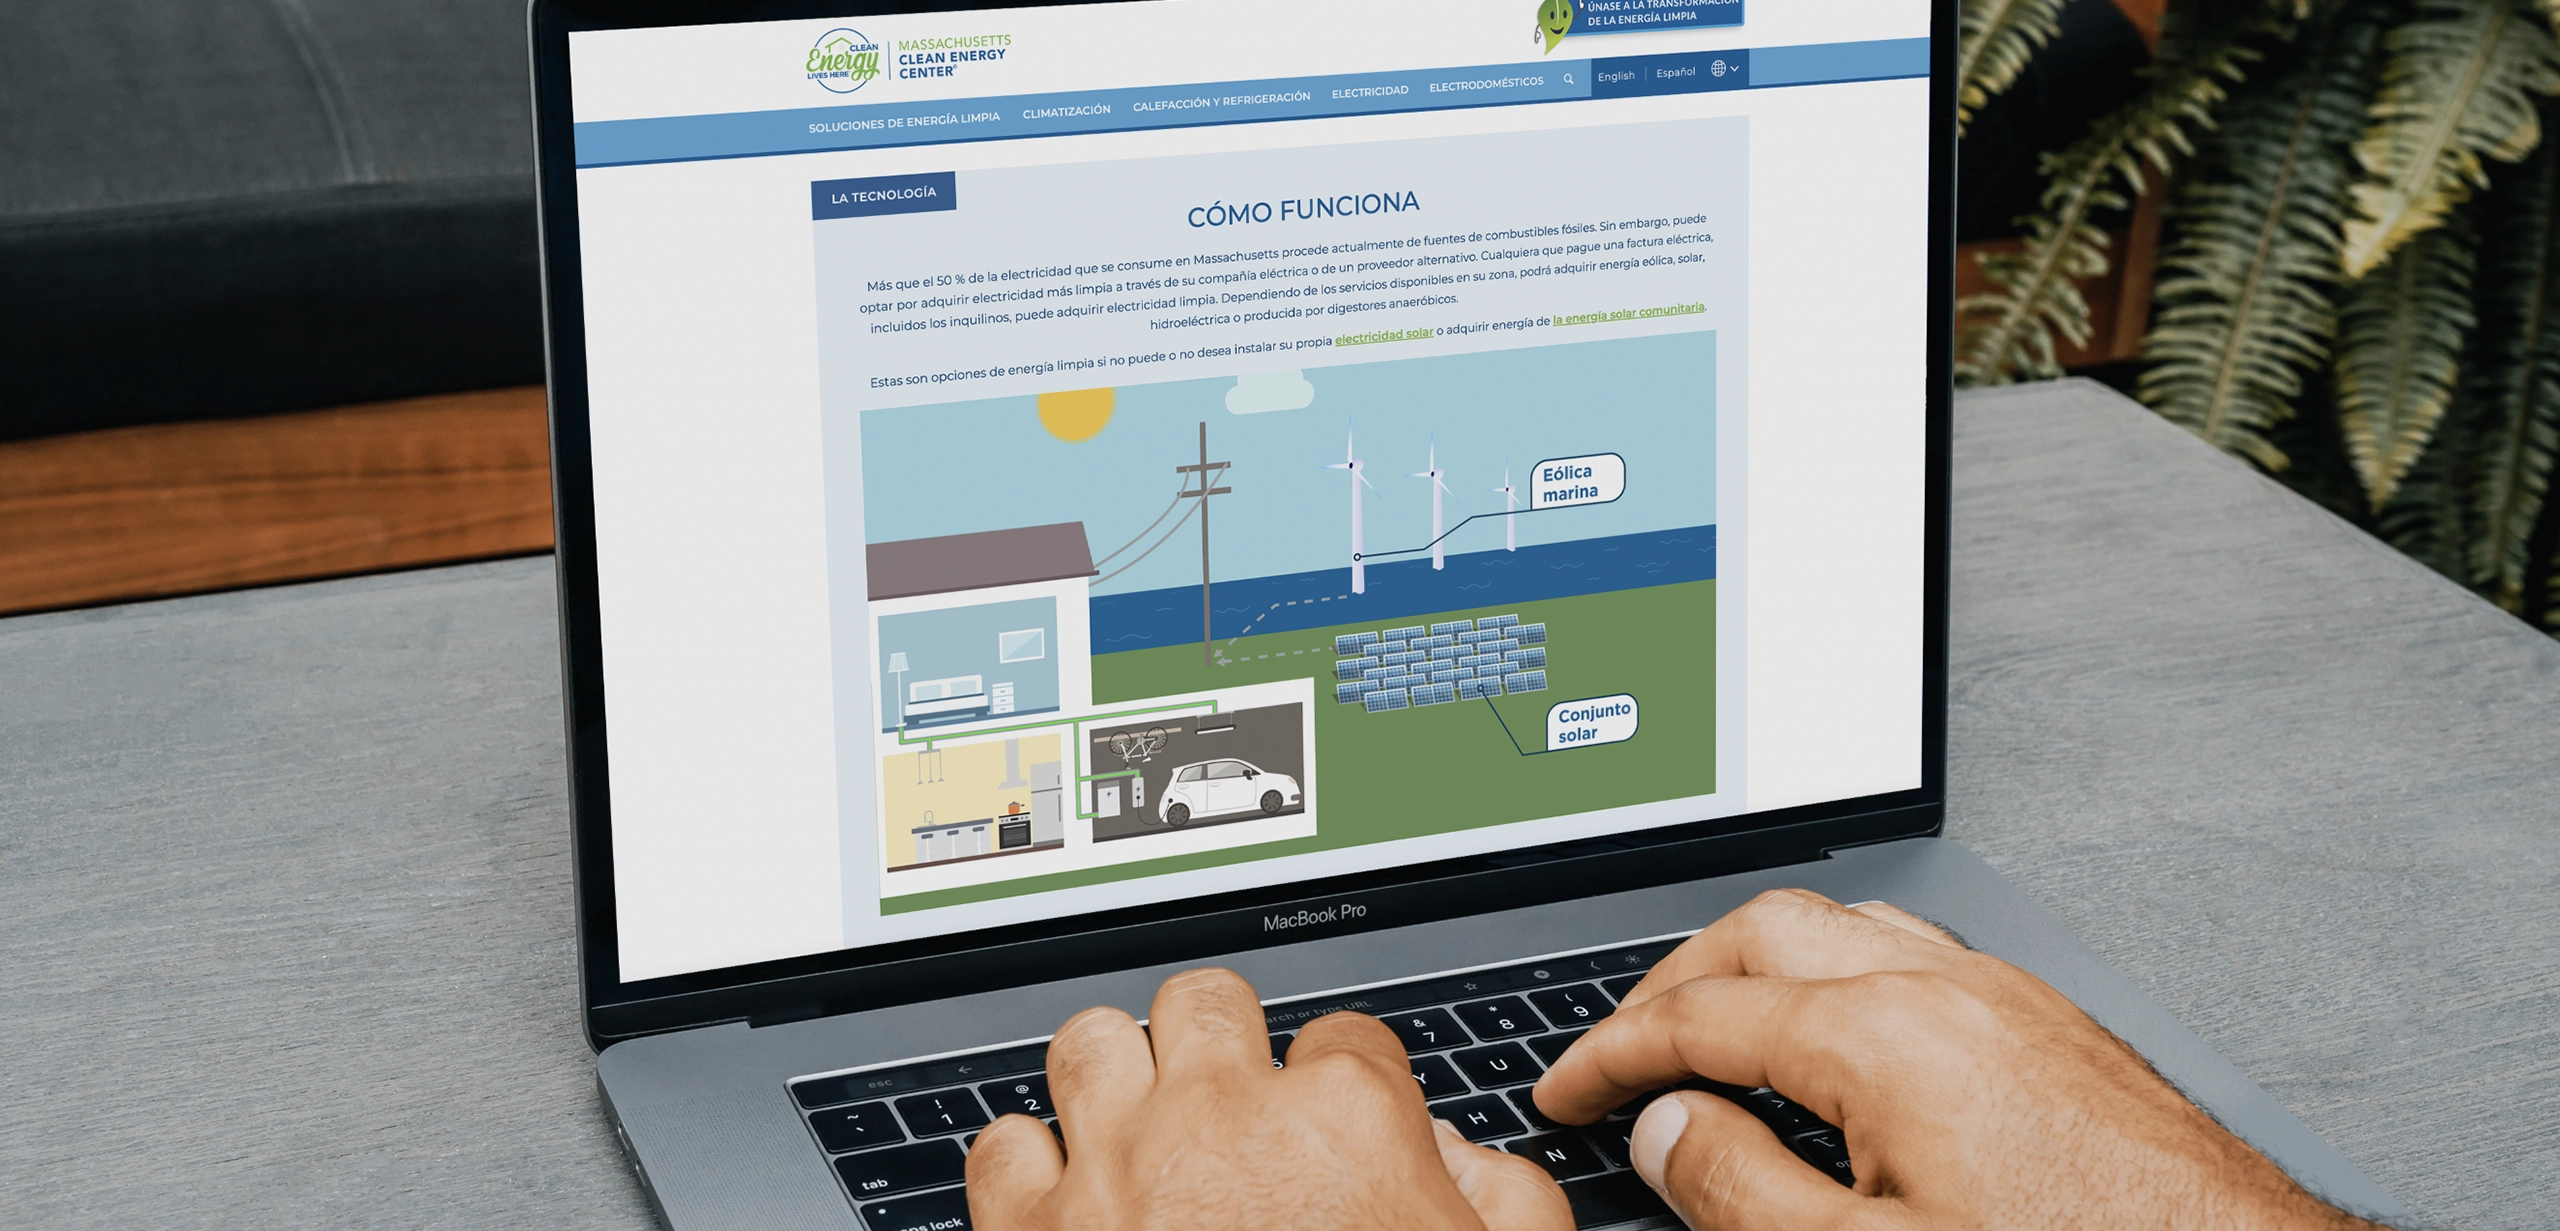 Clean energy company translations and web design